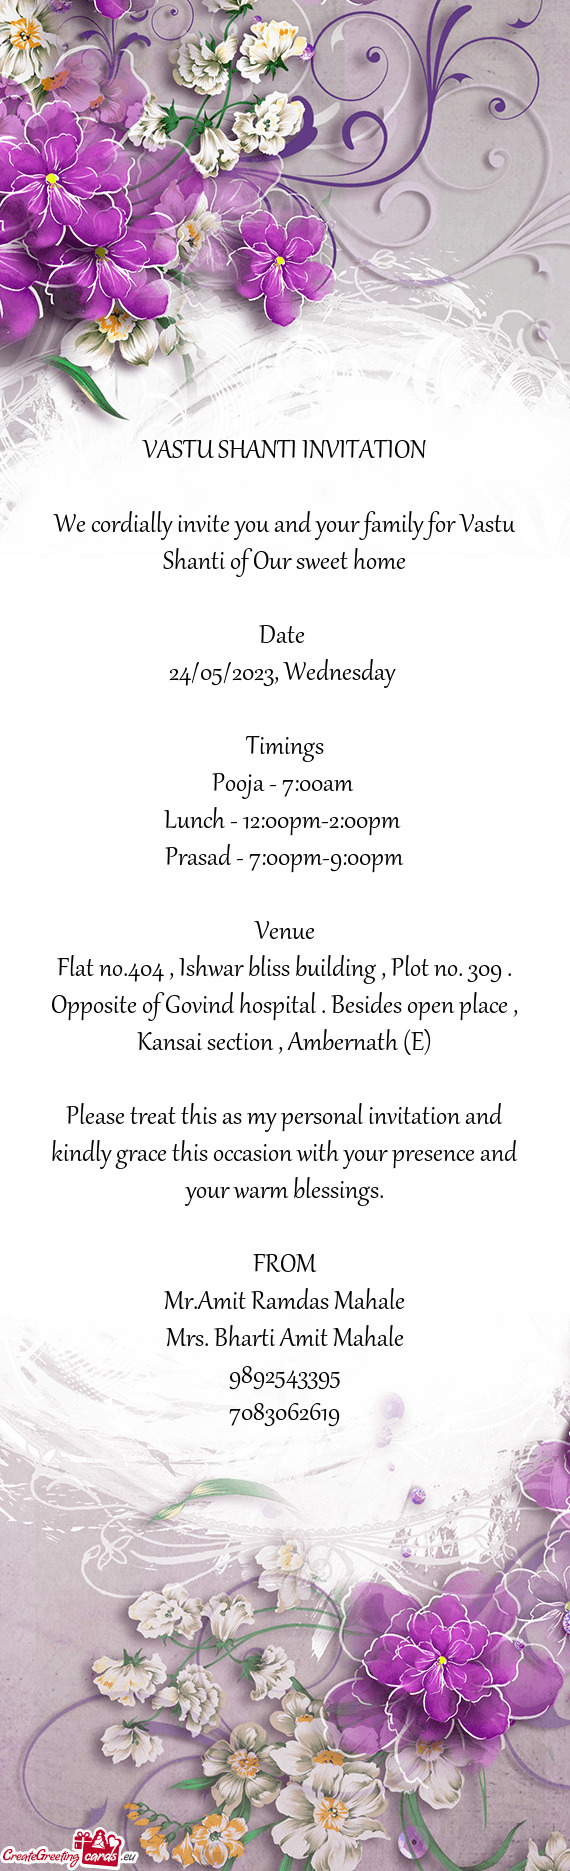 We cordially invite you and your family for Vastu Shanti of Our sweet home